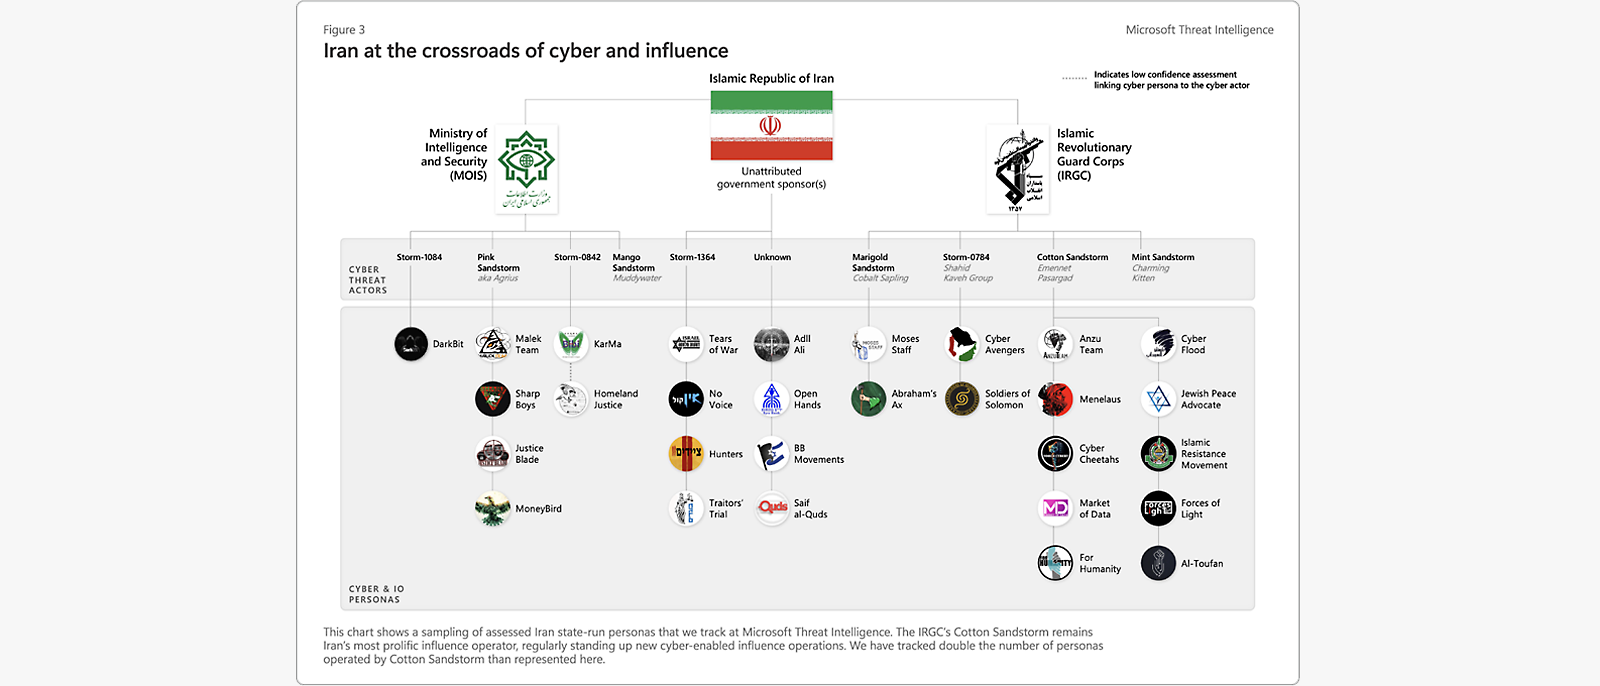 Illustration: Iran's cyber and influence nexus, featuring symbols, Threat Intelligence, and Revolutionary Guard Corps